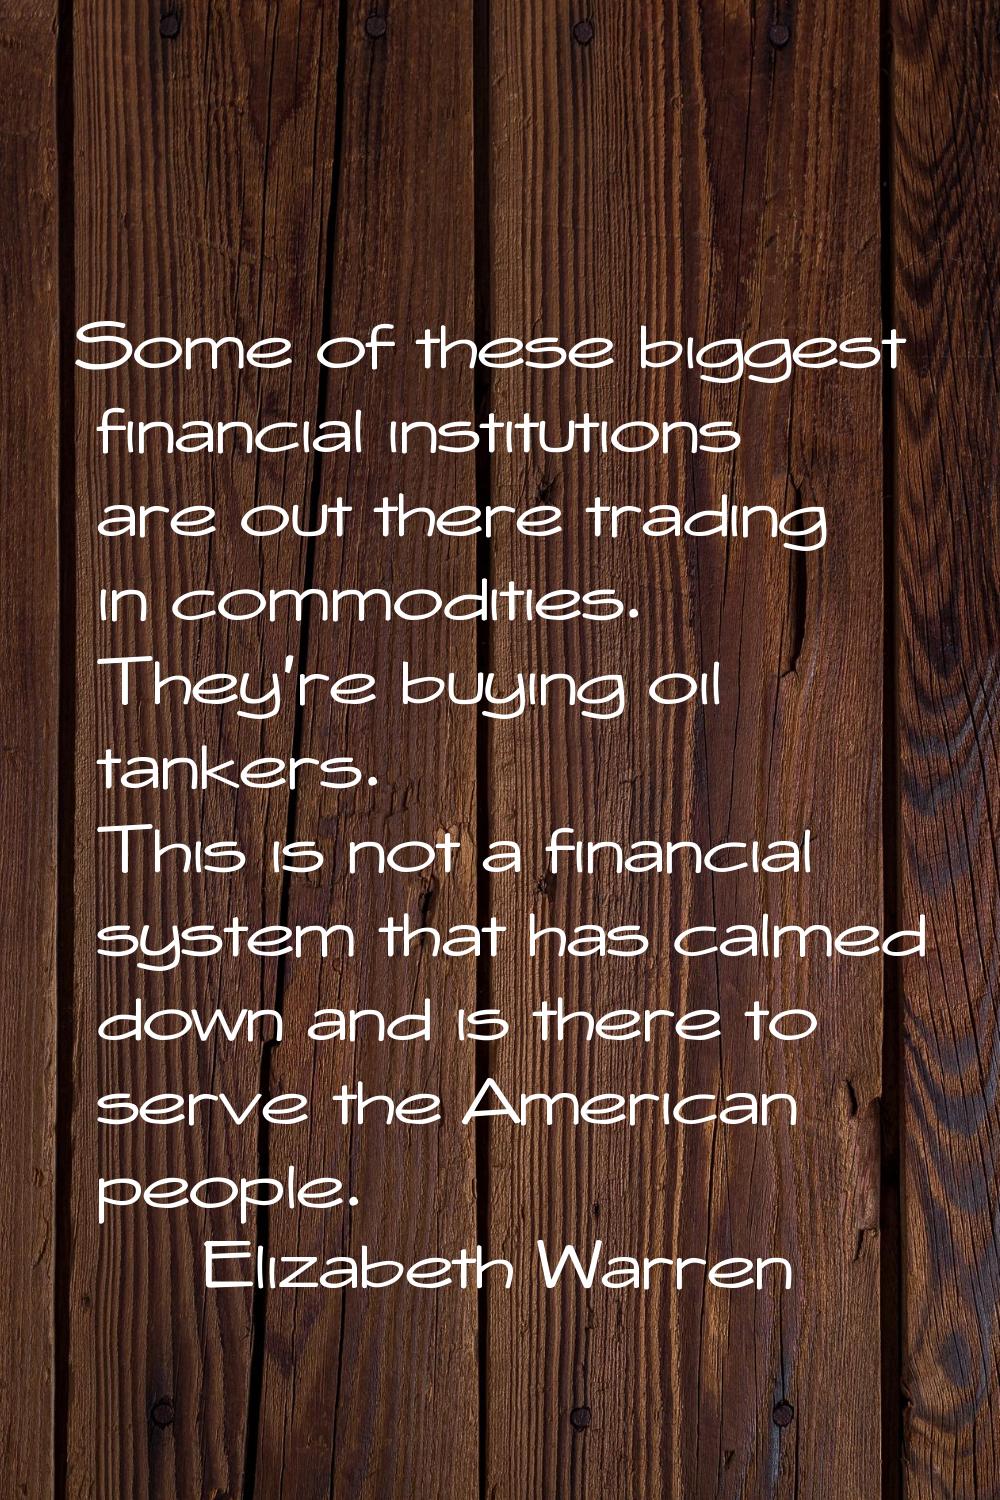 Some of these biggest financial institutions are out there trading in commodities. They're buying o